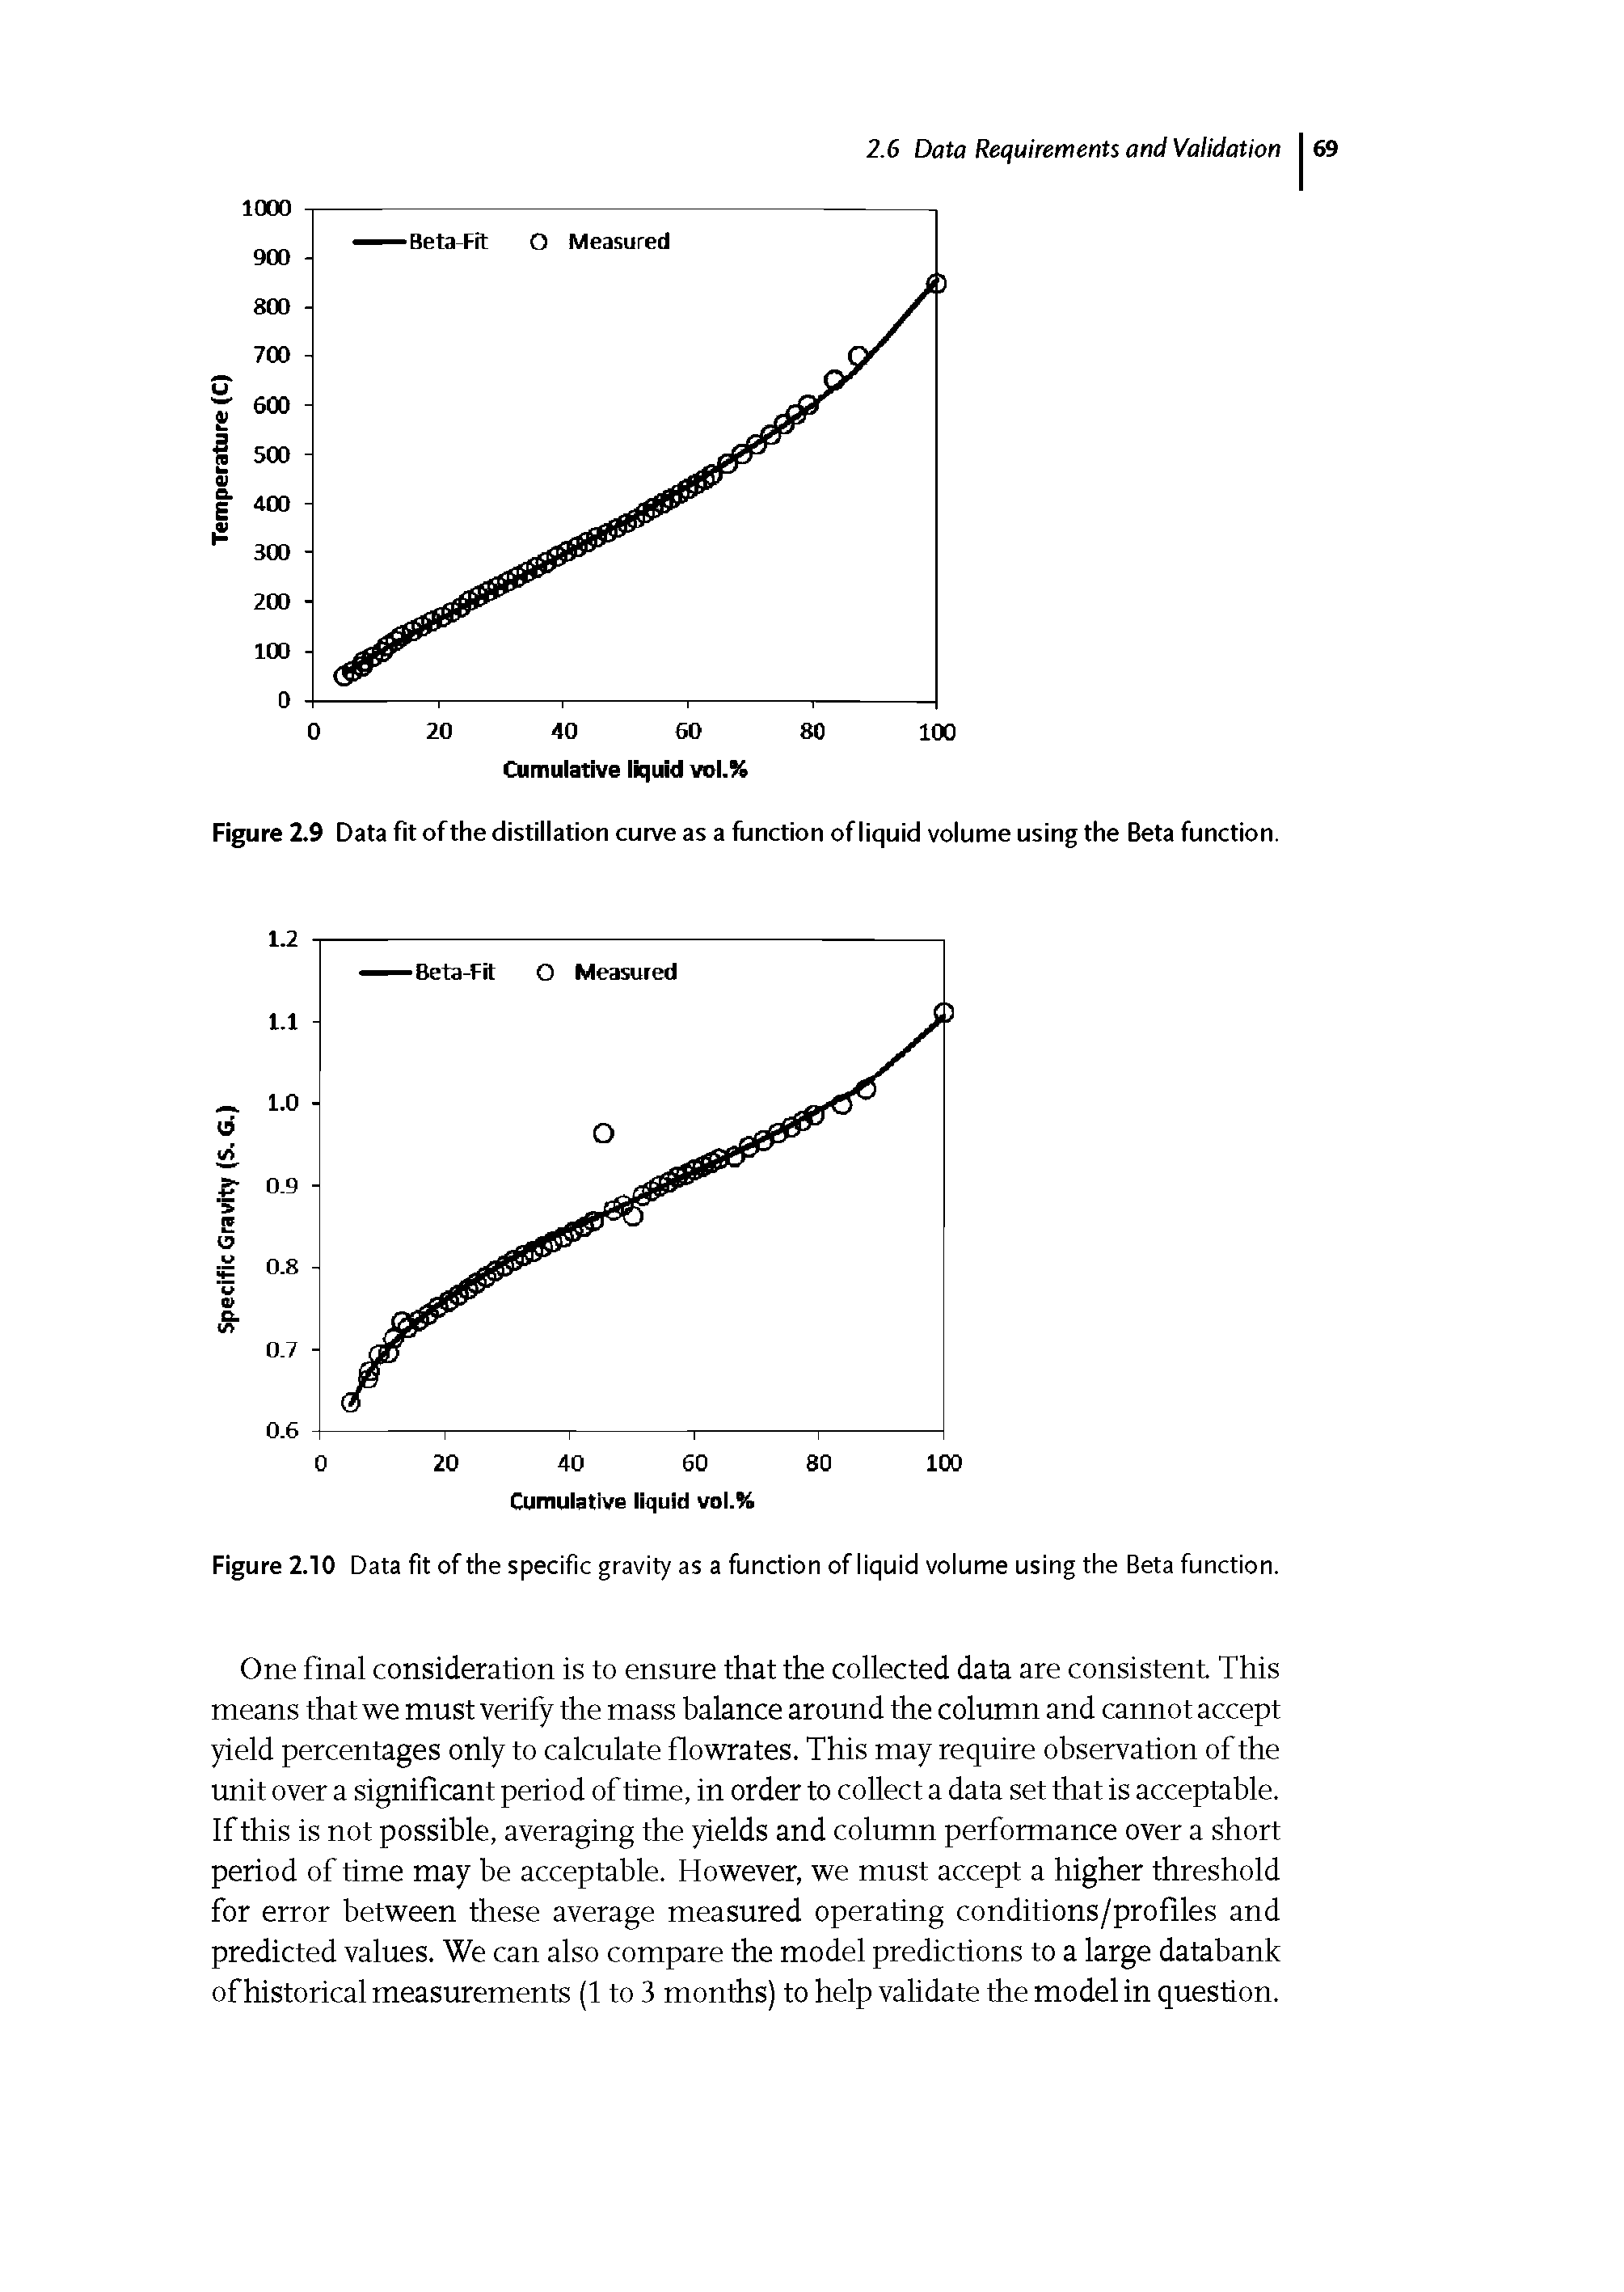 Figure 2.9 Data fit of the distillation curve as a function of liquid volume using the Beta function.